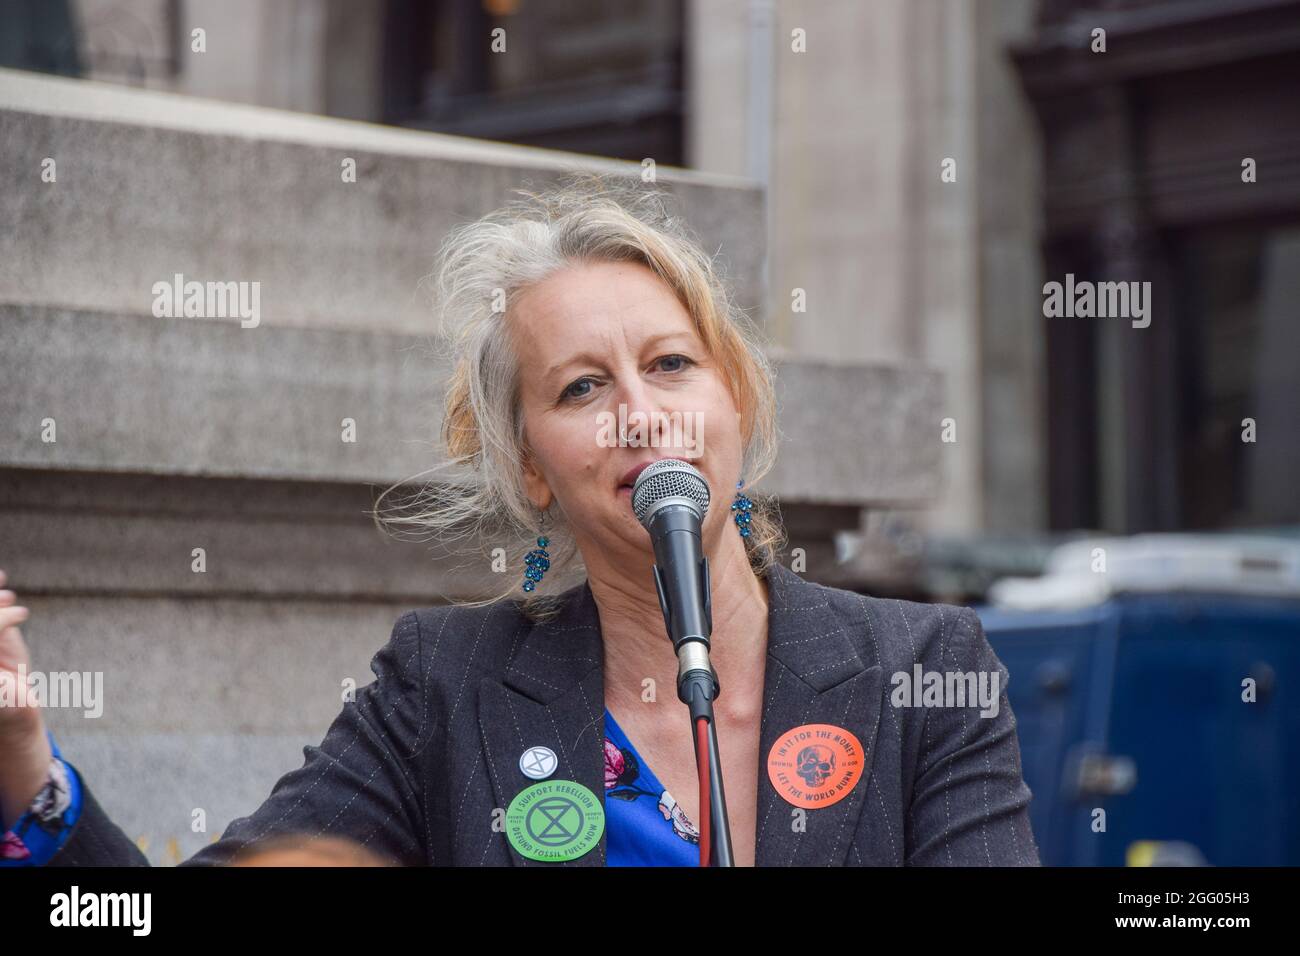 London, United Kingdom. 27th August 2021. Extinction Rebellion co-founder Gail Bradbrook speaks to protesters outside The Royal Exchange, part of their Blood Money March targeting the City of London. (Credit: Vuk Valcic / Alamy Live News) Stock Photo